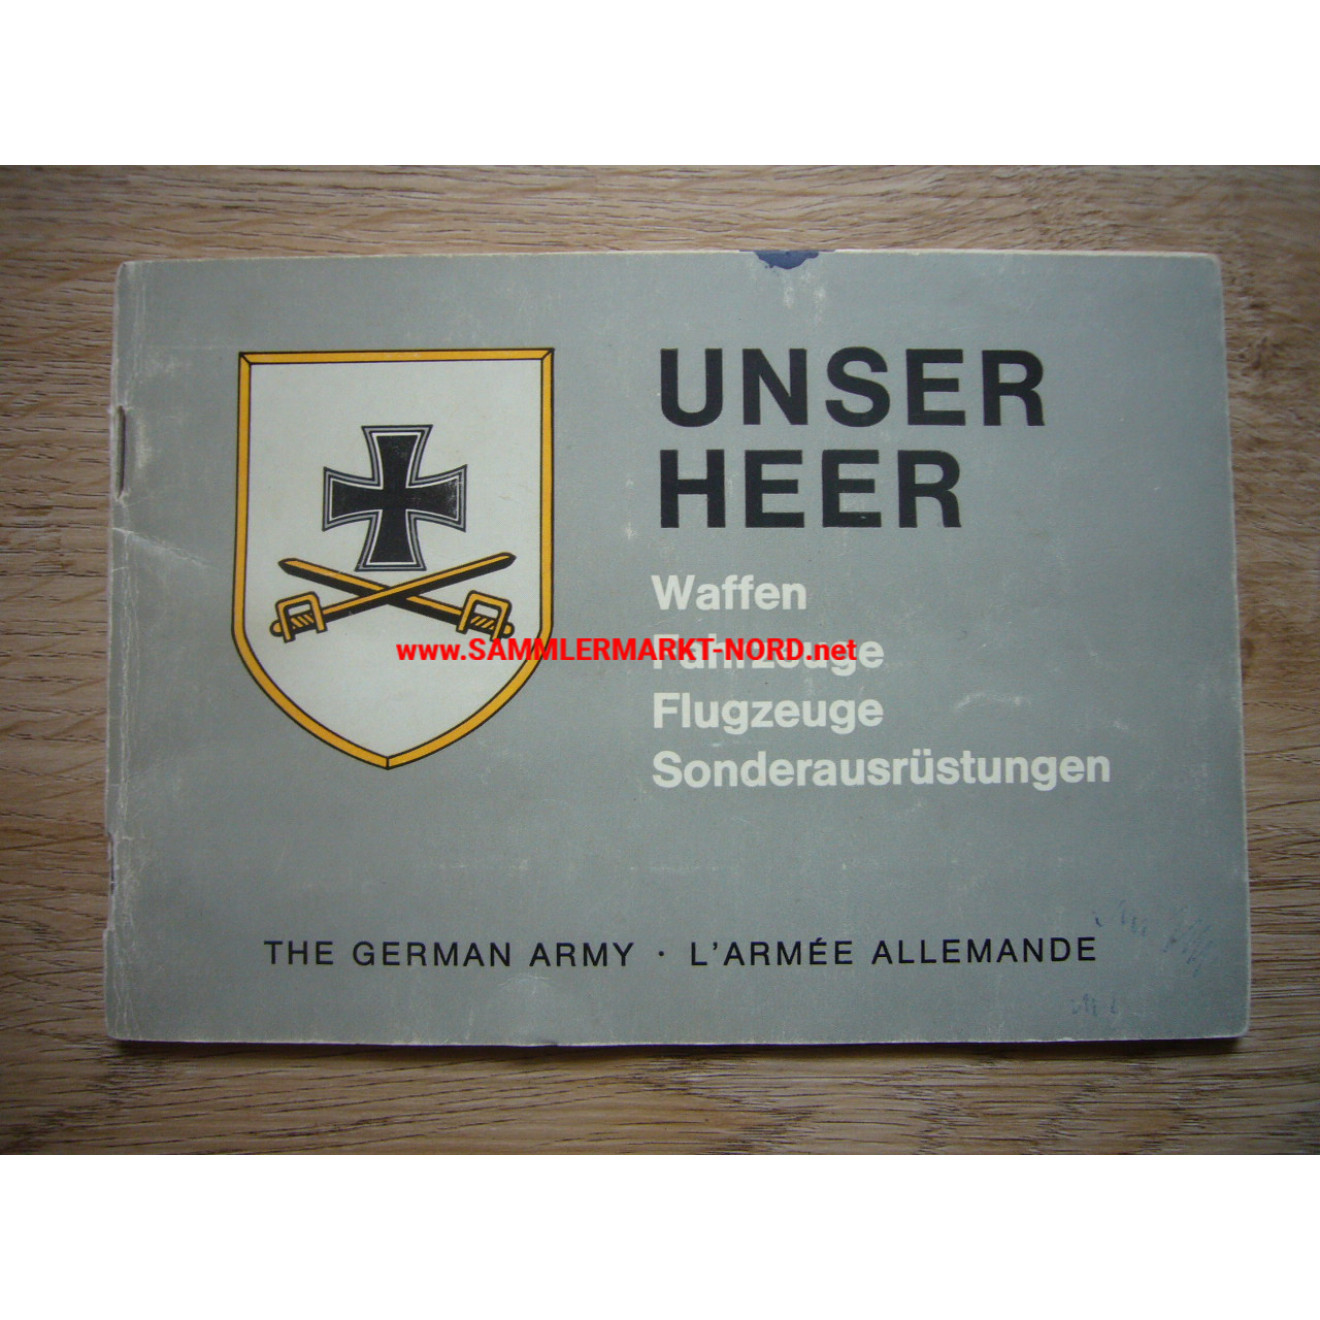 Bundeswehr - Our army - booklet from 1970